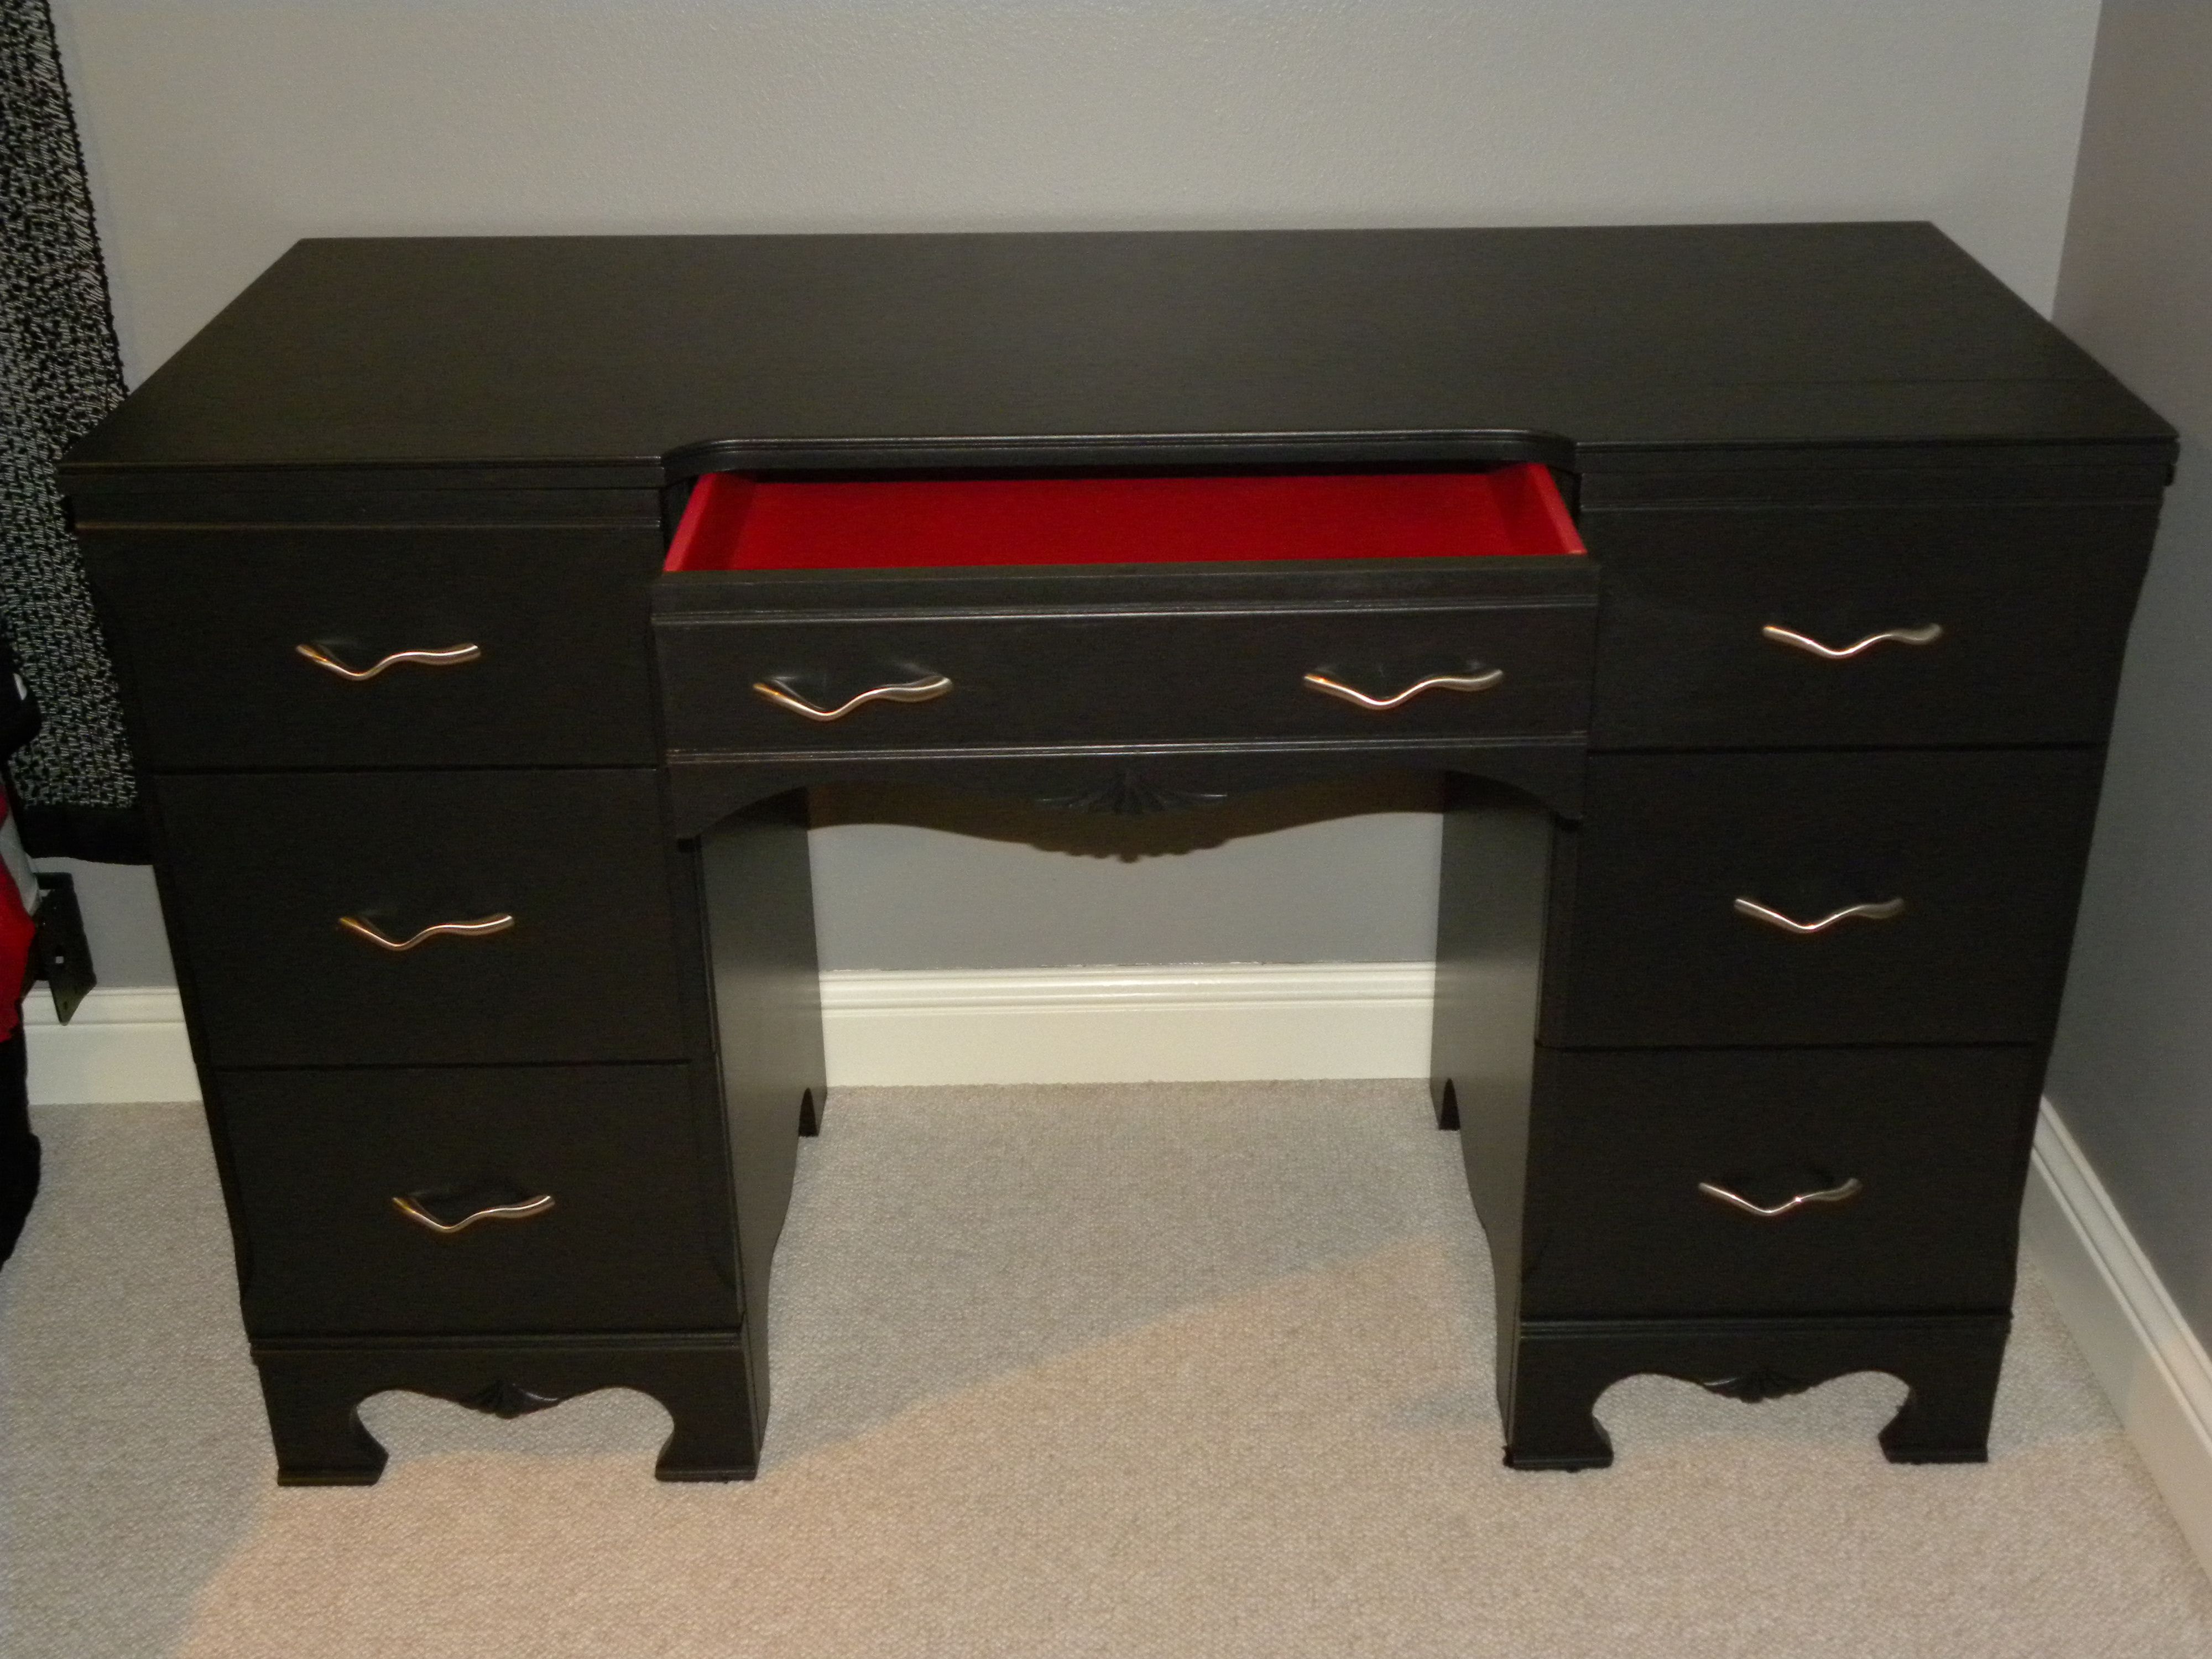 Painted old solid wood desk black. Painted inside drawers red and ...